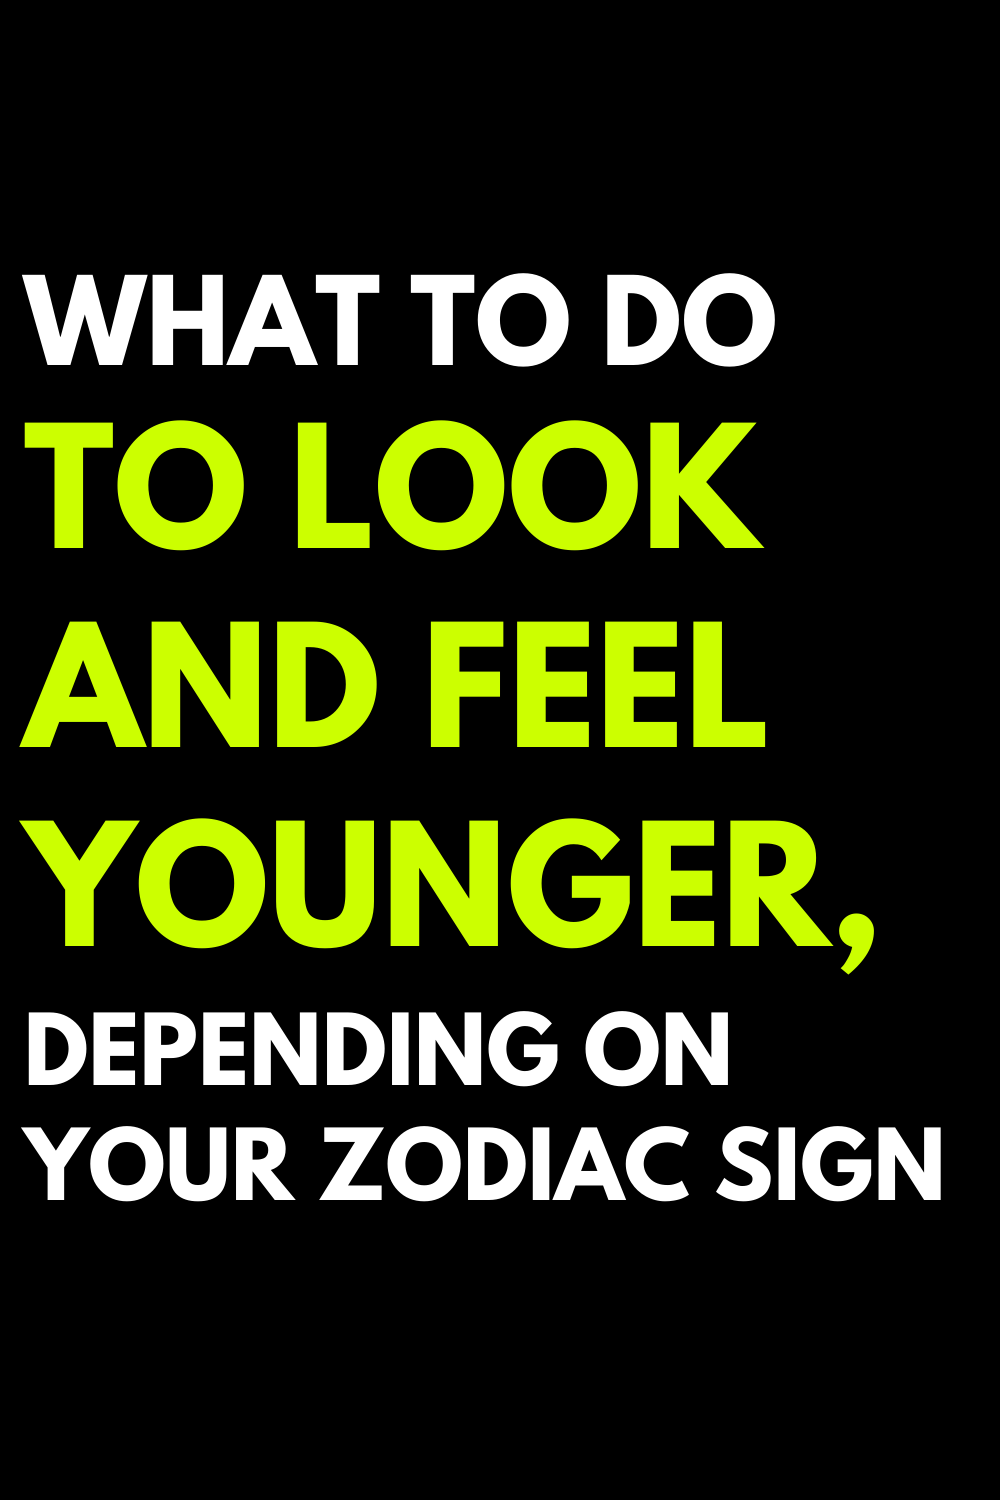 What to do to look and feel younger, depending on your zodiac sign